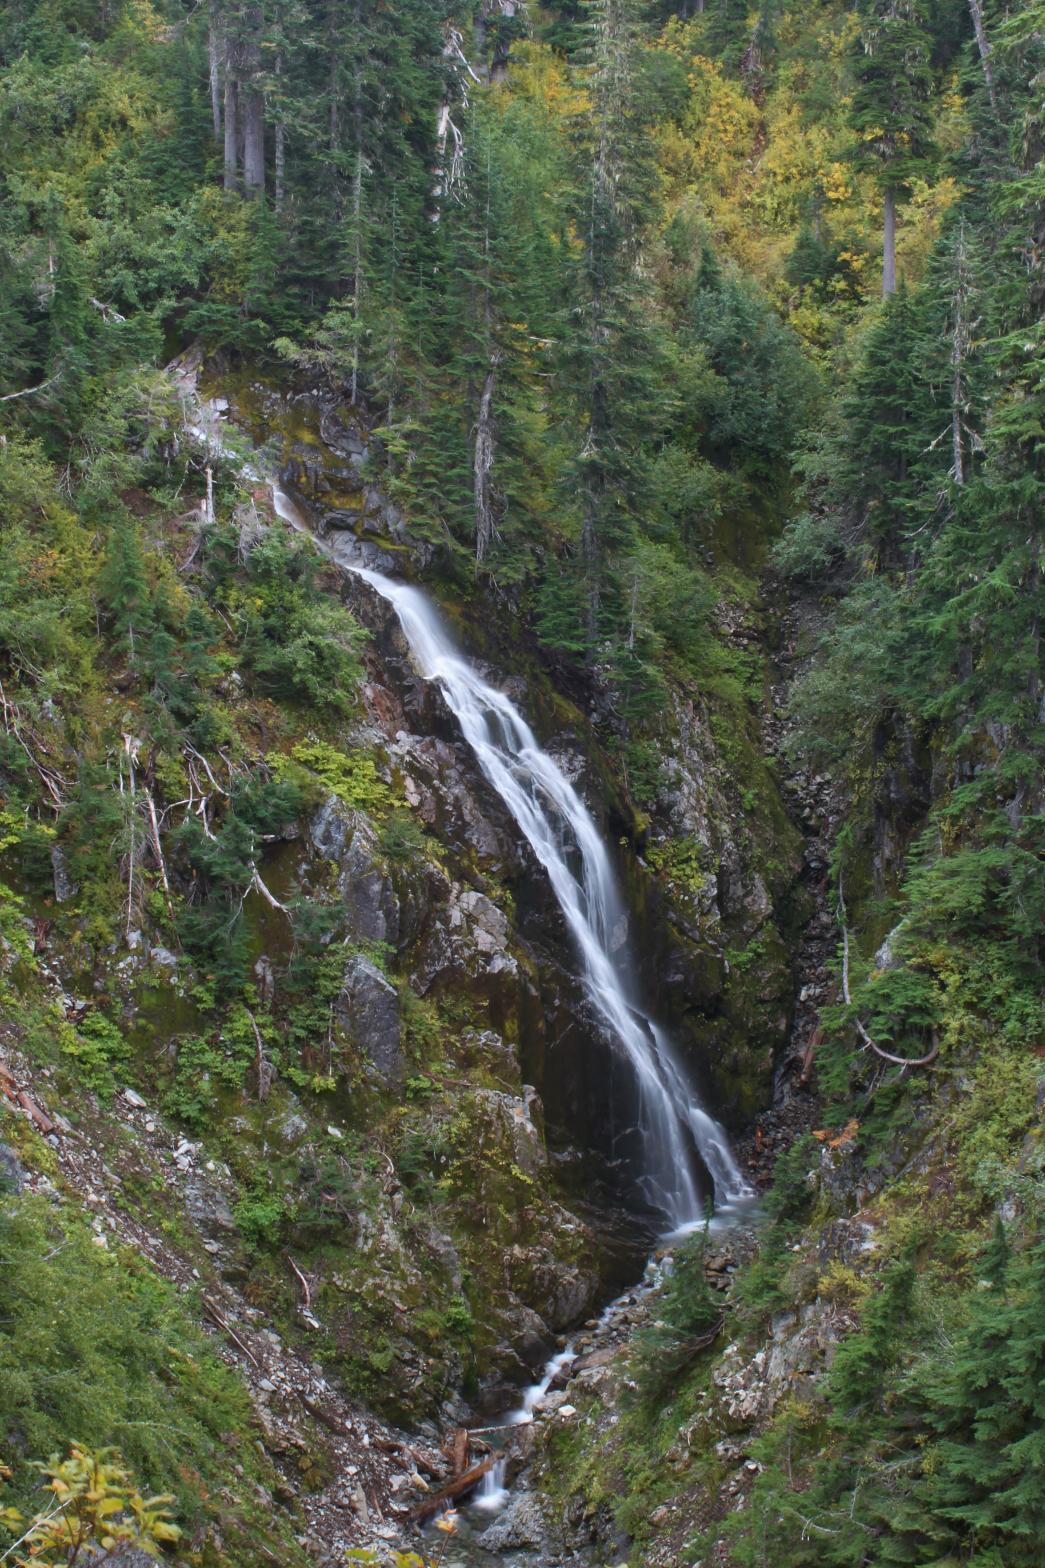 Agathot Falls from the north side of the canyon